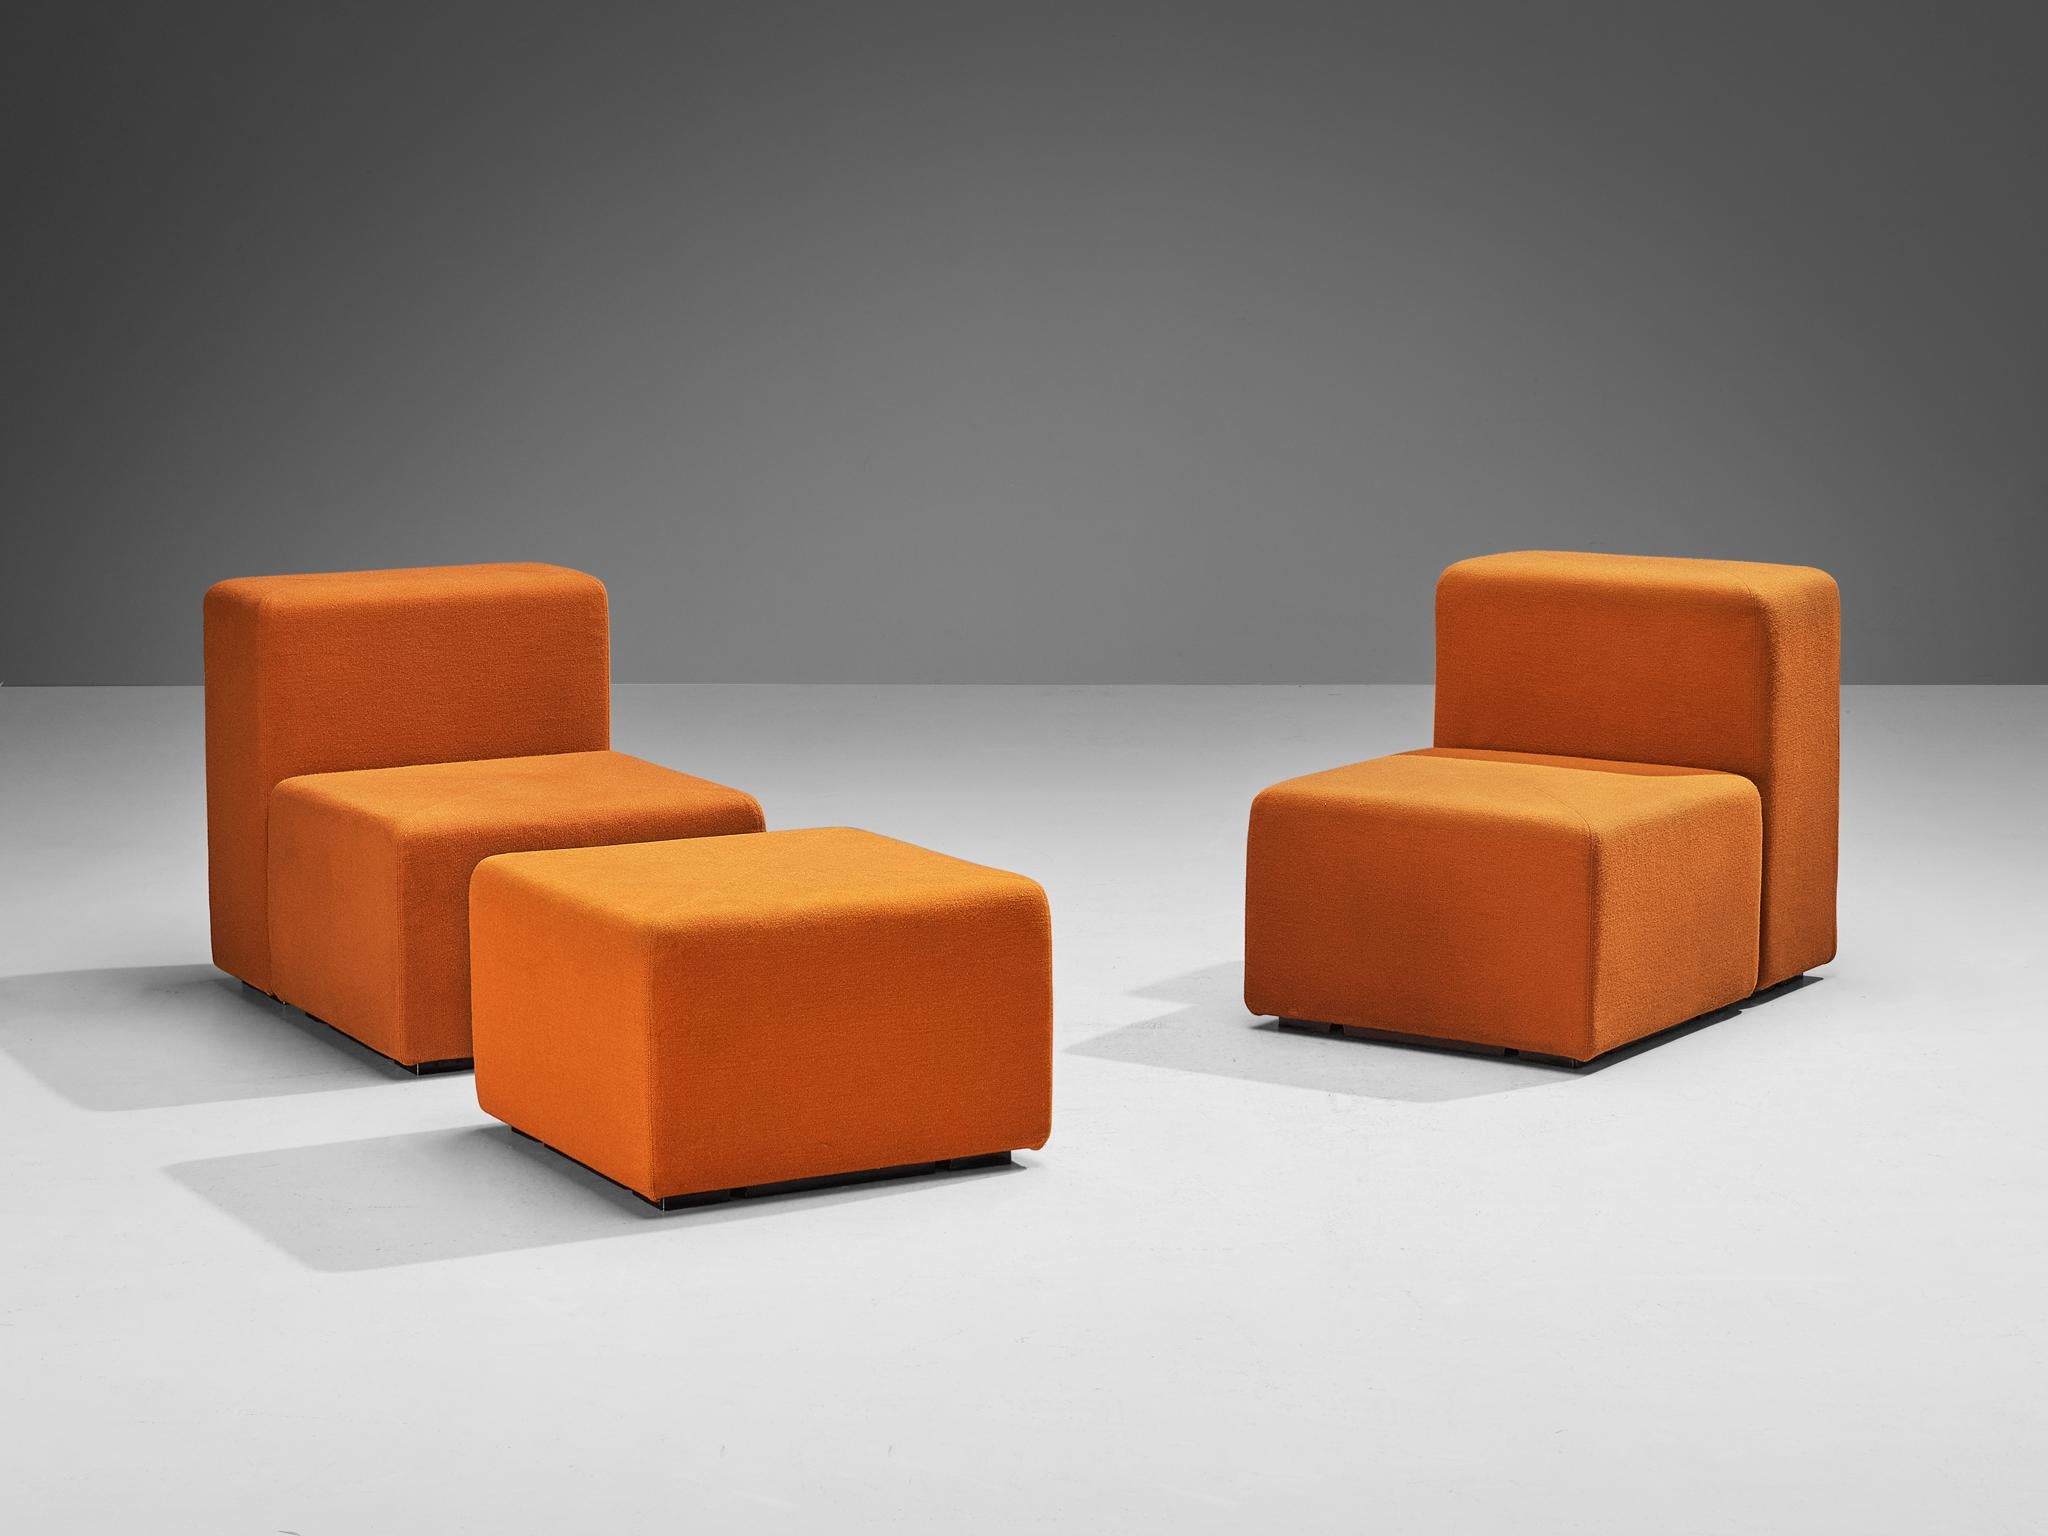 Giancarlo Piretti for Anonima Castelli, 'Sistema 61' pair of lounge chairs with ottoman, fabric, plastic, Italy, 1973

In the realm of 1970s design, the Sistema 61 emerges as a striking testament to the Italian design world, where it was commonplace